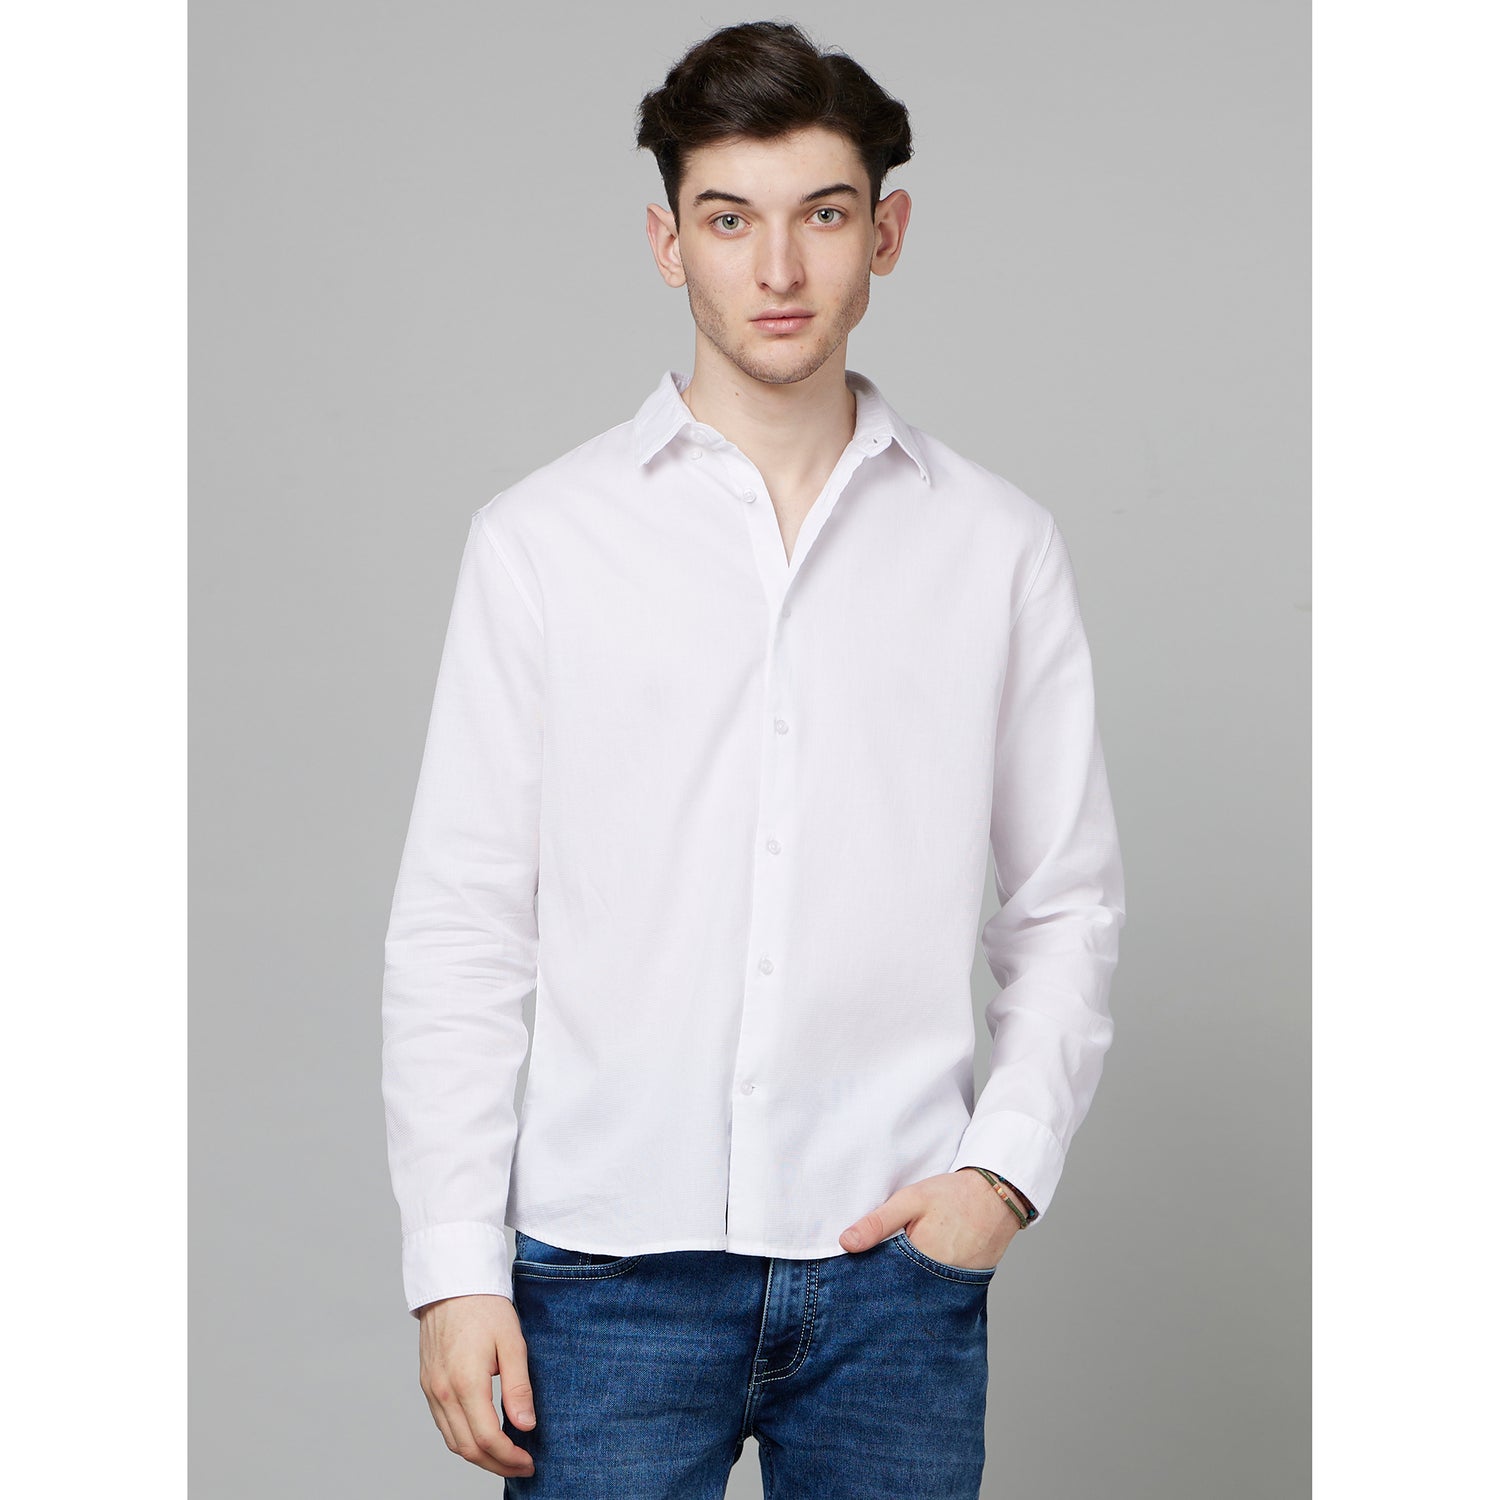 White Solid Full Sleeve Poly Blend Shirts (FASTRETCHO)